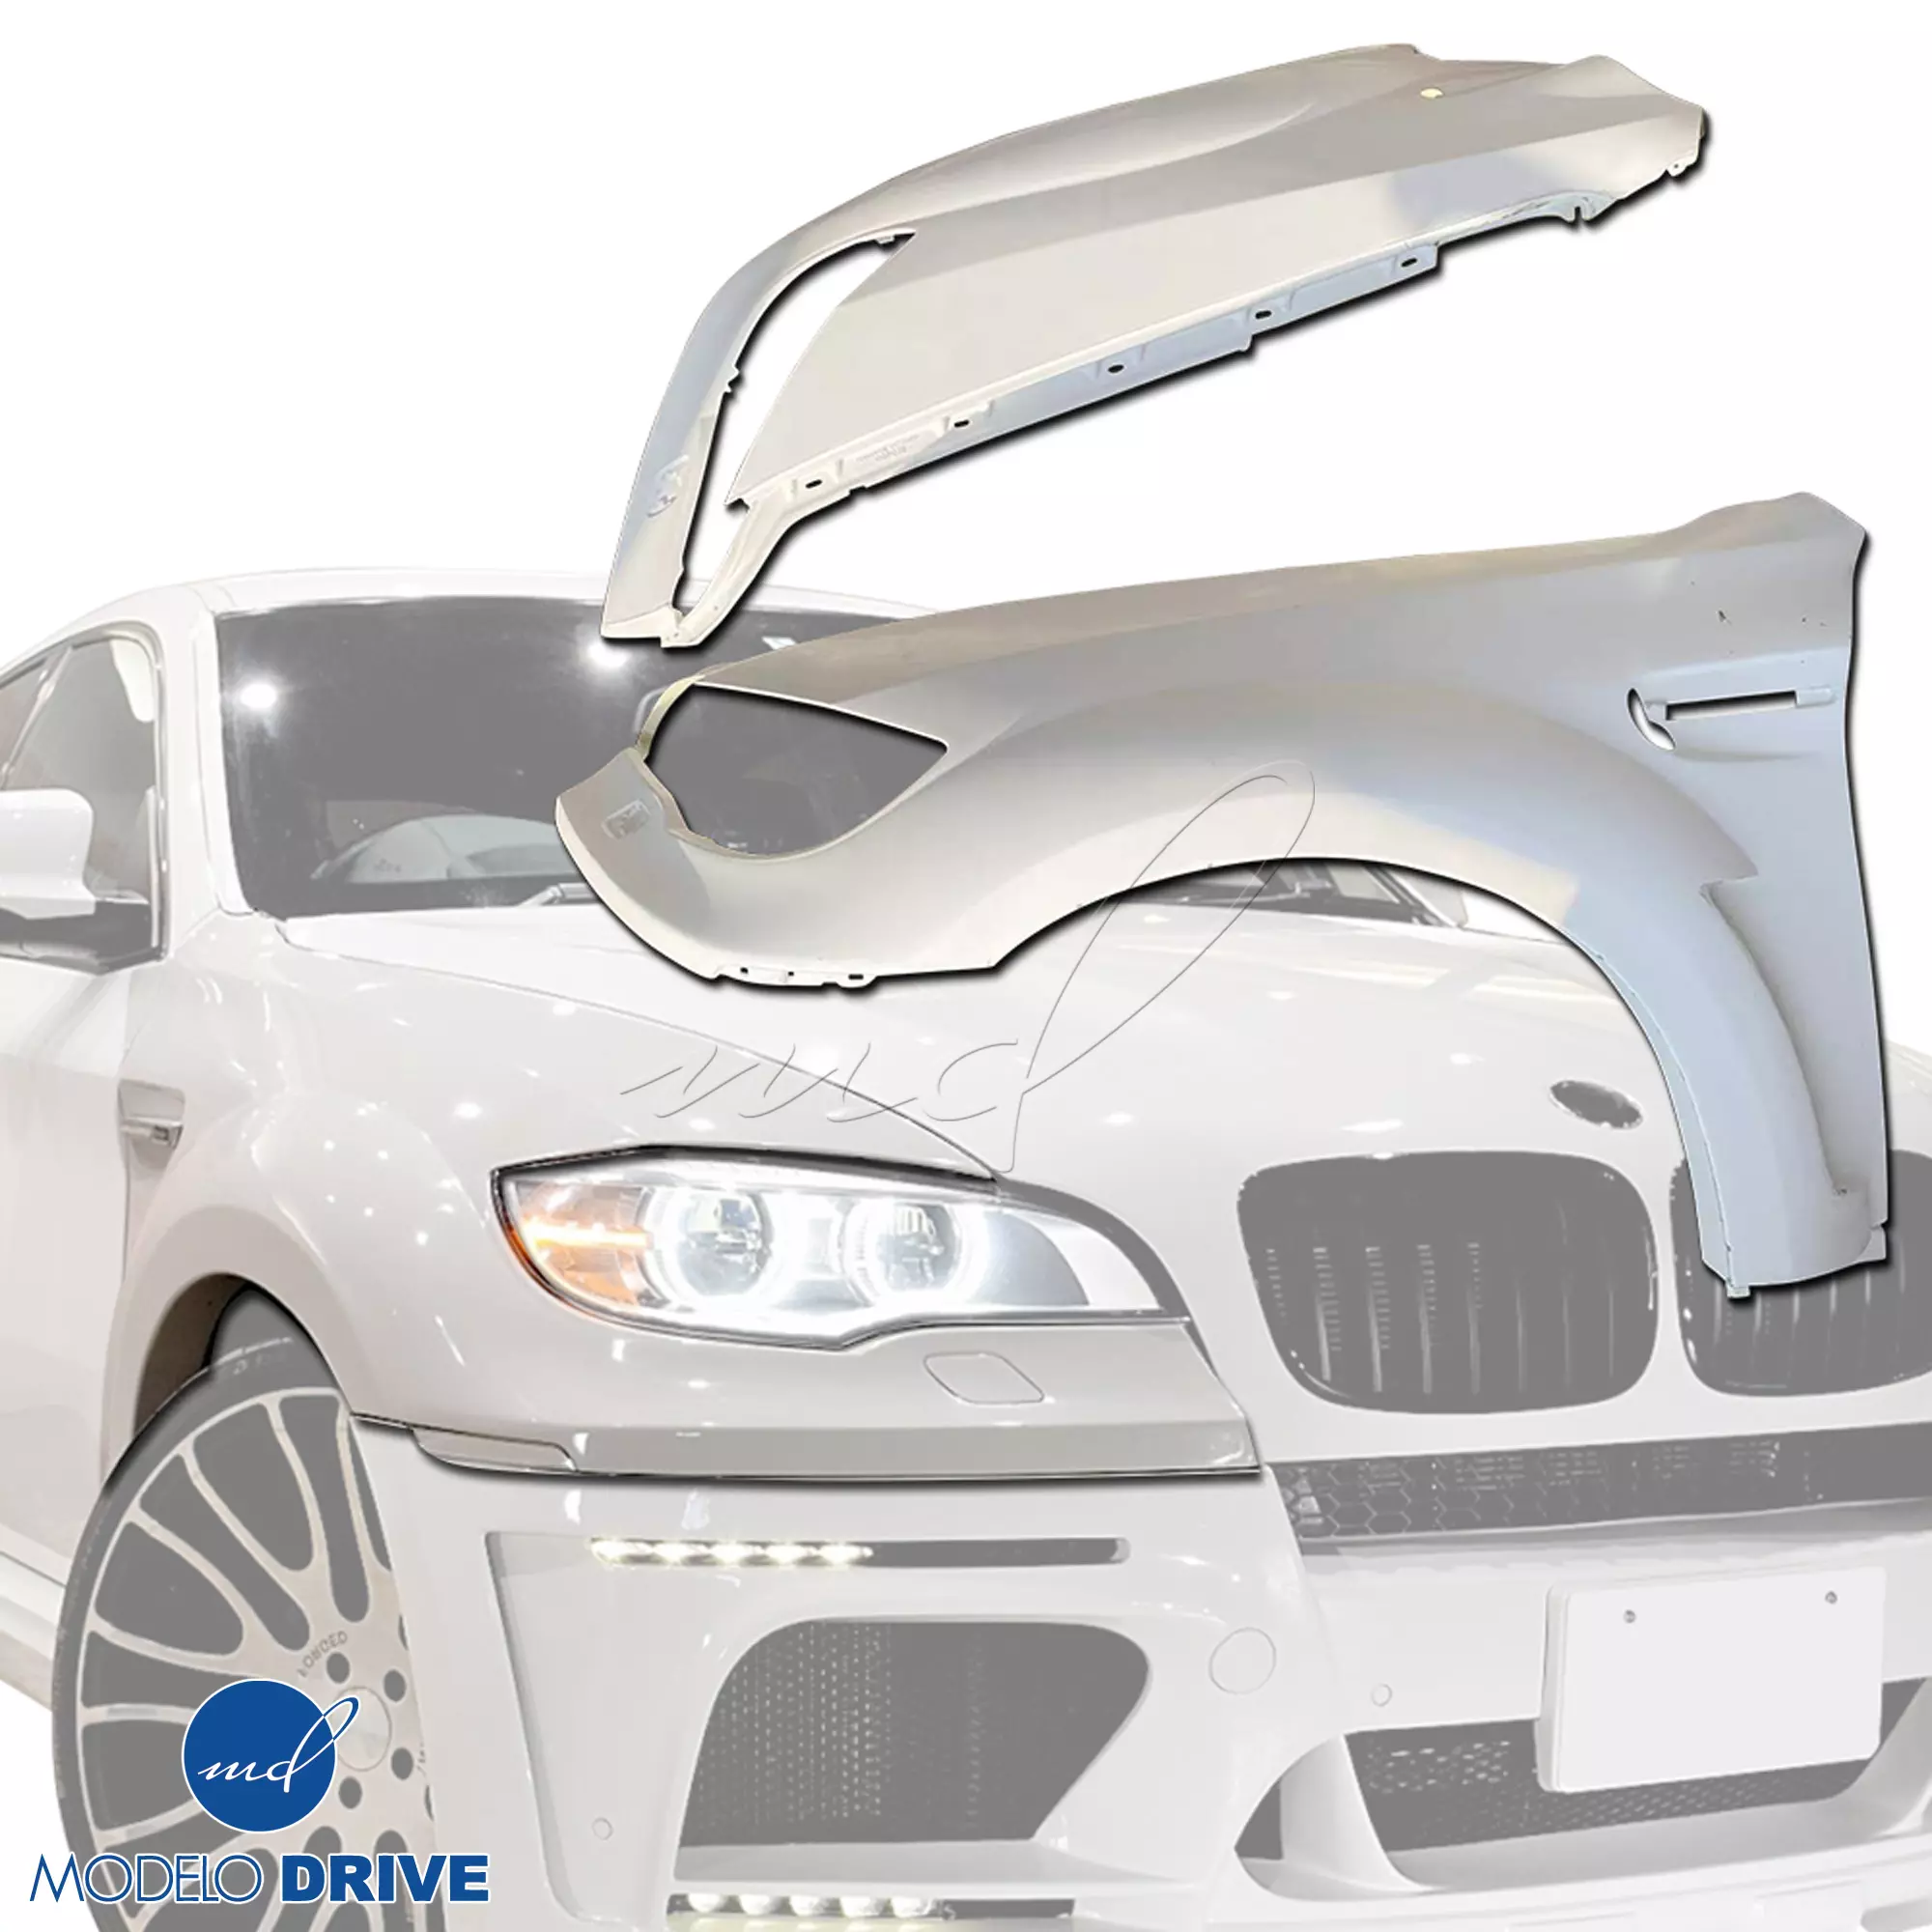 ModeloDrive FRP HAMA Wide Body Fenders (front) 2pc > BMW X6 E71 2008-2014 - Image 1